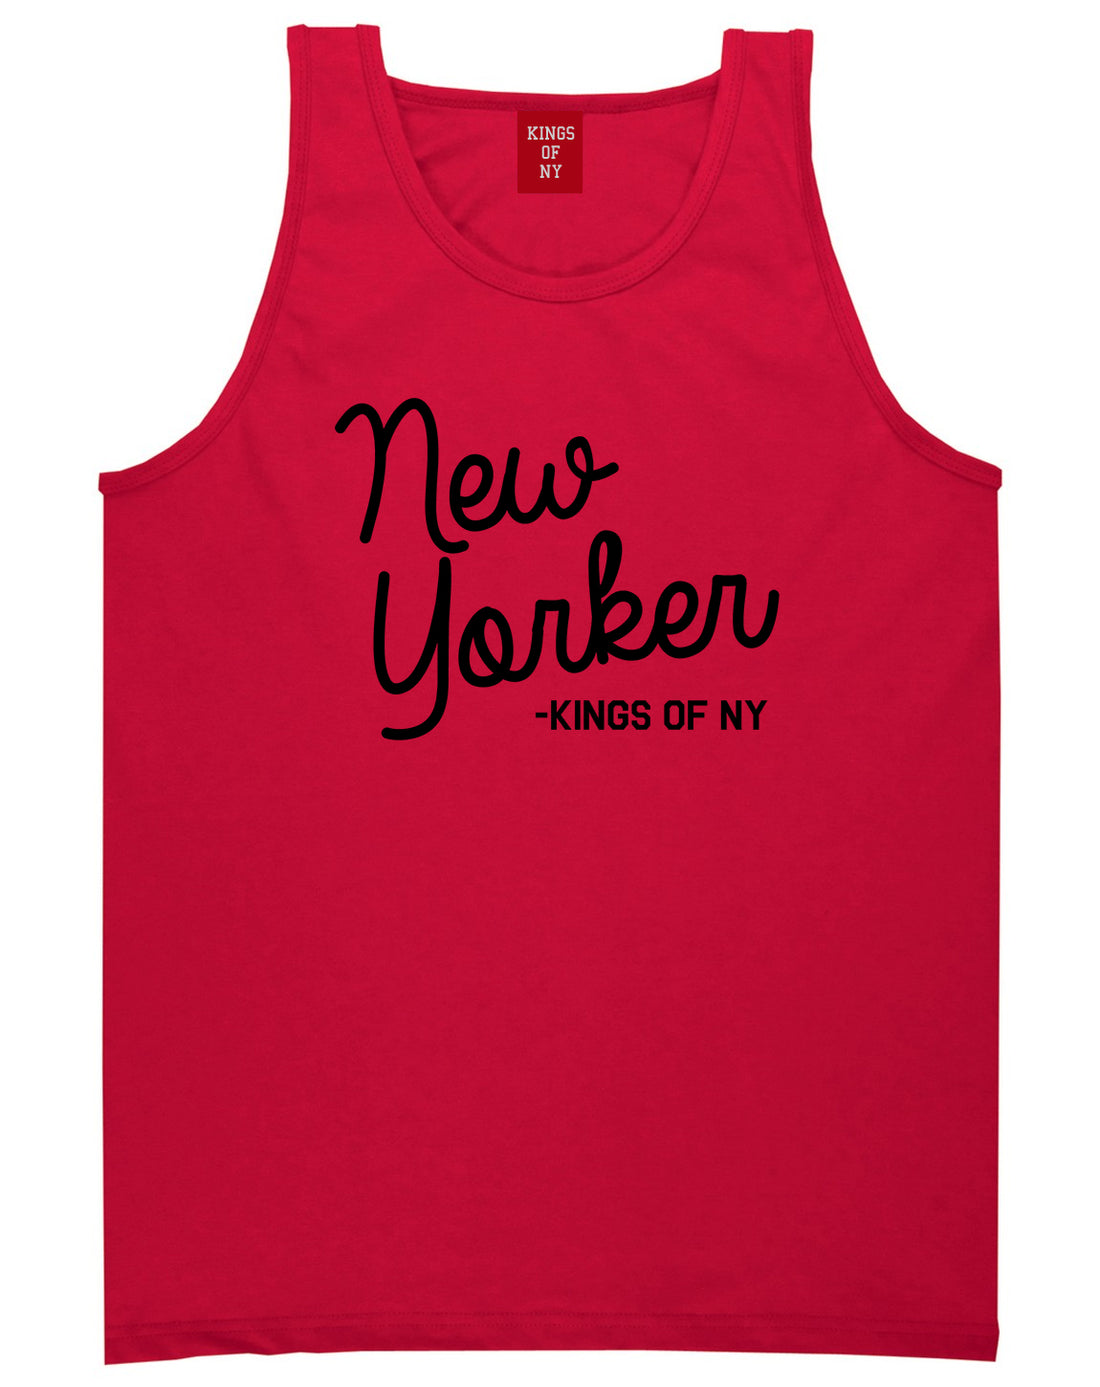 New Yorker Script Mens Tank Top Shirt Red by Kings Of NY